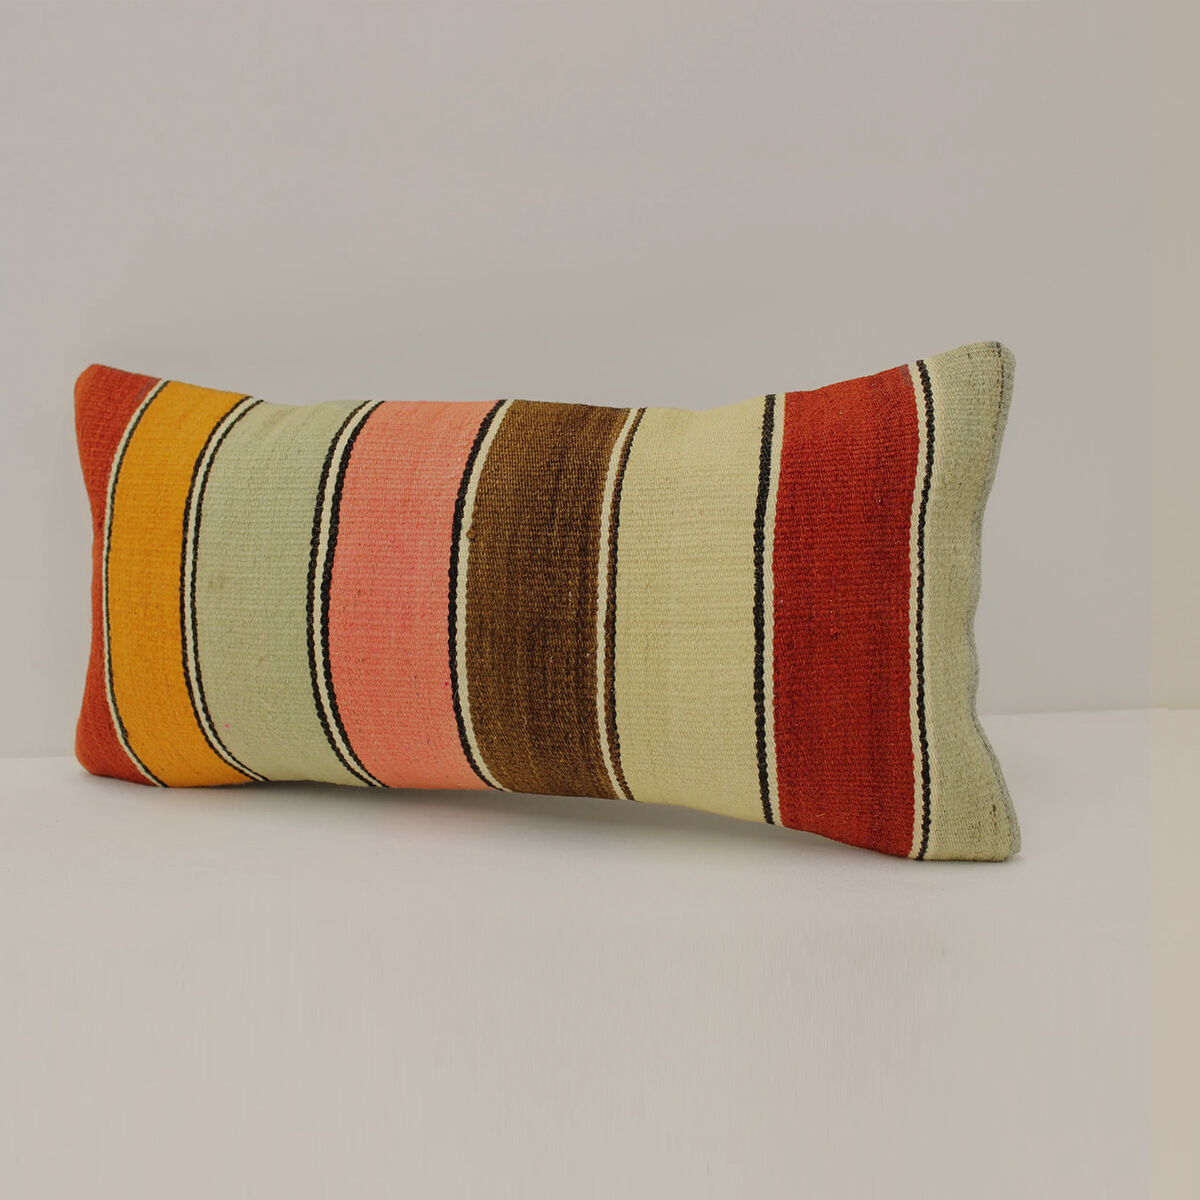 COLORED CUSHIONS